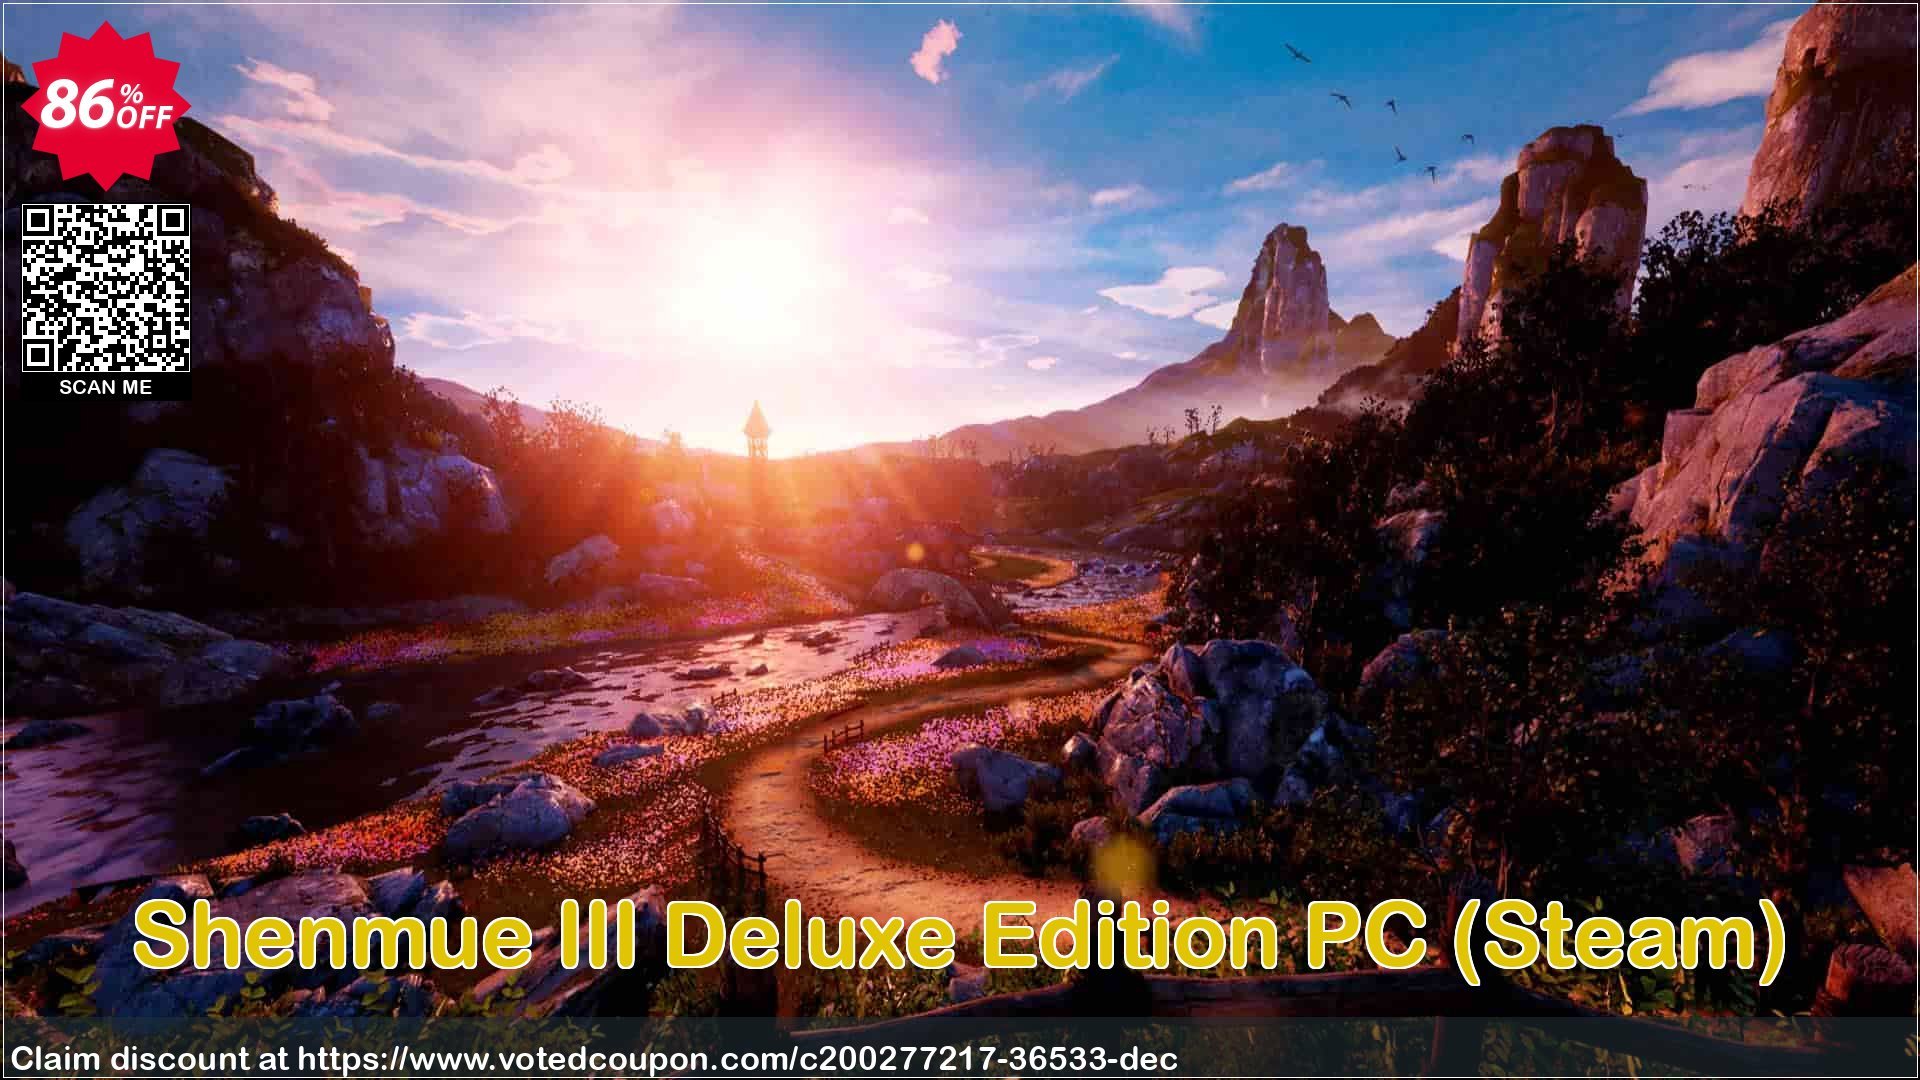 Shenmue III Deluxe Edition PC, Steam  Coupon Code Jun 2024, 86% OFF - VotedCoupon